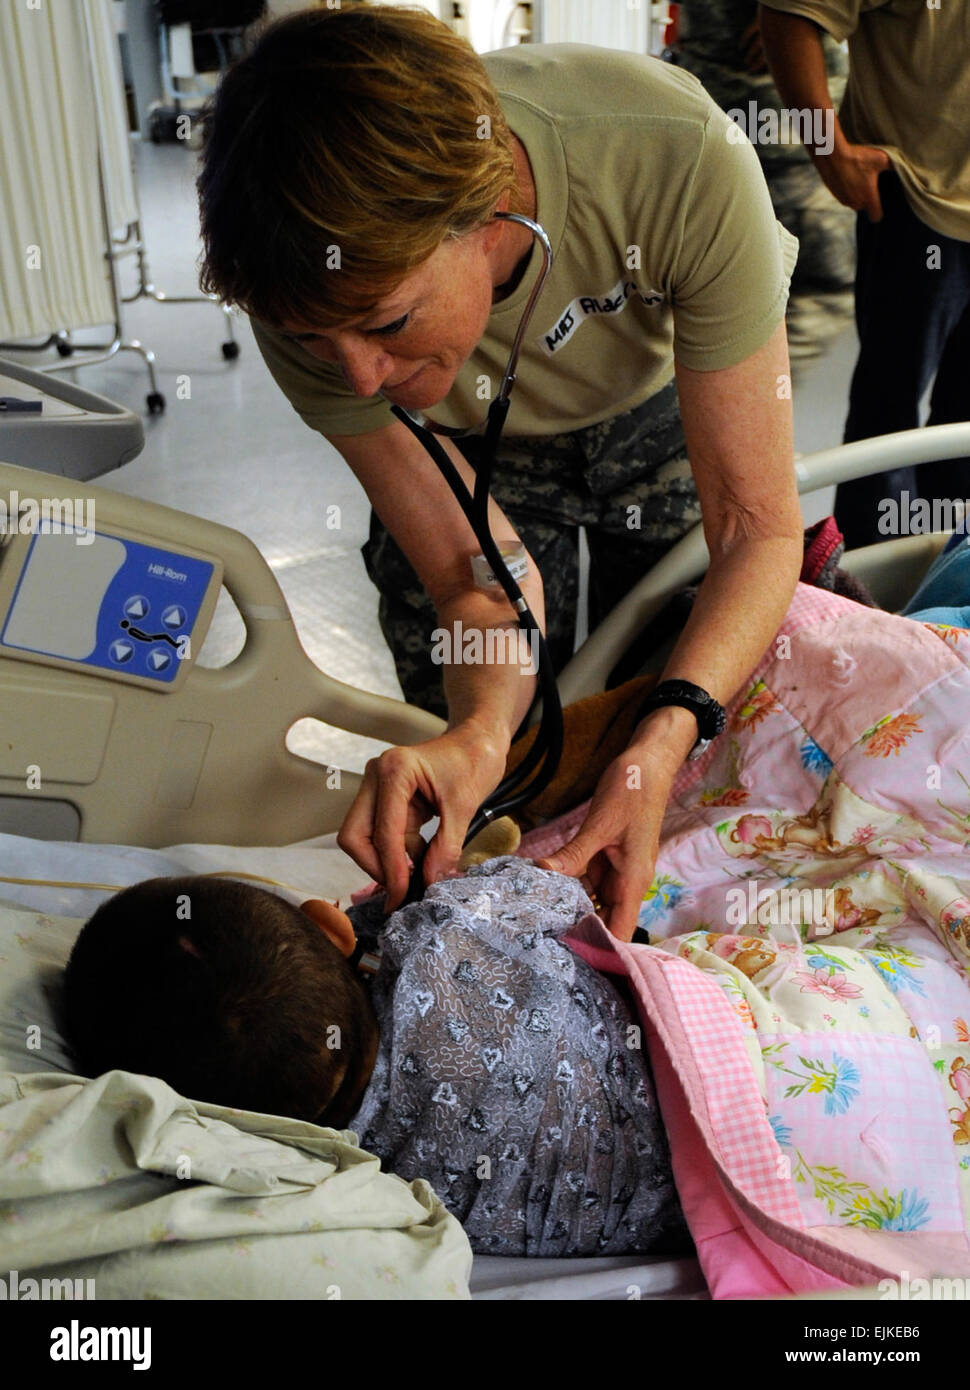 U.S. Army Maj. Una Alderman, the chief nurse officer for the 452nd Army Reserve, from Wisconsin, tends to a patient at the hospital on Forward Operating Base Salerno, Aug. 5, 2009. She is stationed in the same area of operation as her son, Staff Sgt. Seth Alderman, a military policeman with the 4th Brigade Combat Team, 25th Infantry Division.    U.S. Army Pfc. Andrya Hill, 4th Brigade Combat Team, 25th Infantry Division Public Affairs Office         Mother, son serve together in Afghanistan  /-news/2009/08/08/25668-mother-son-serve-together-in-afghanistan/index.html Stock Photo